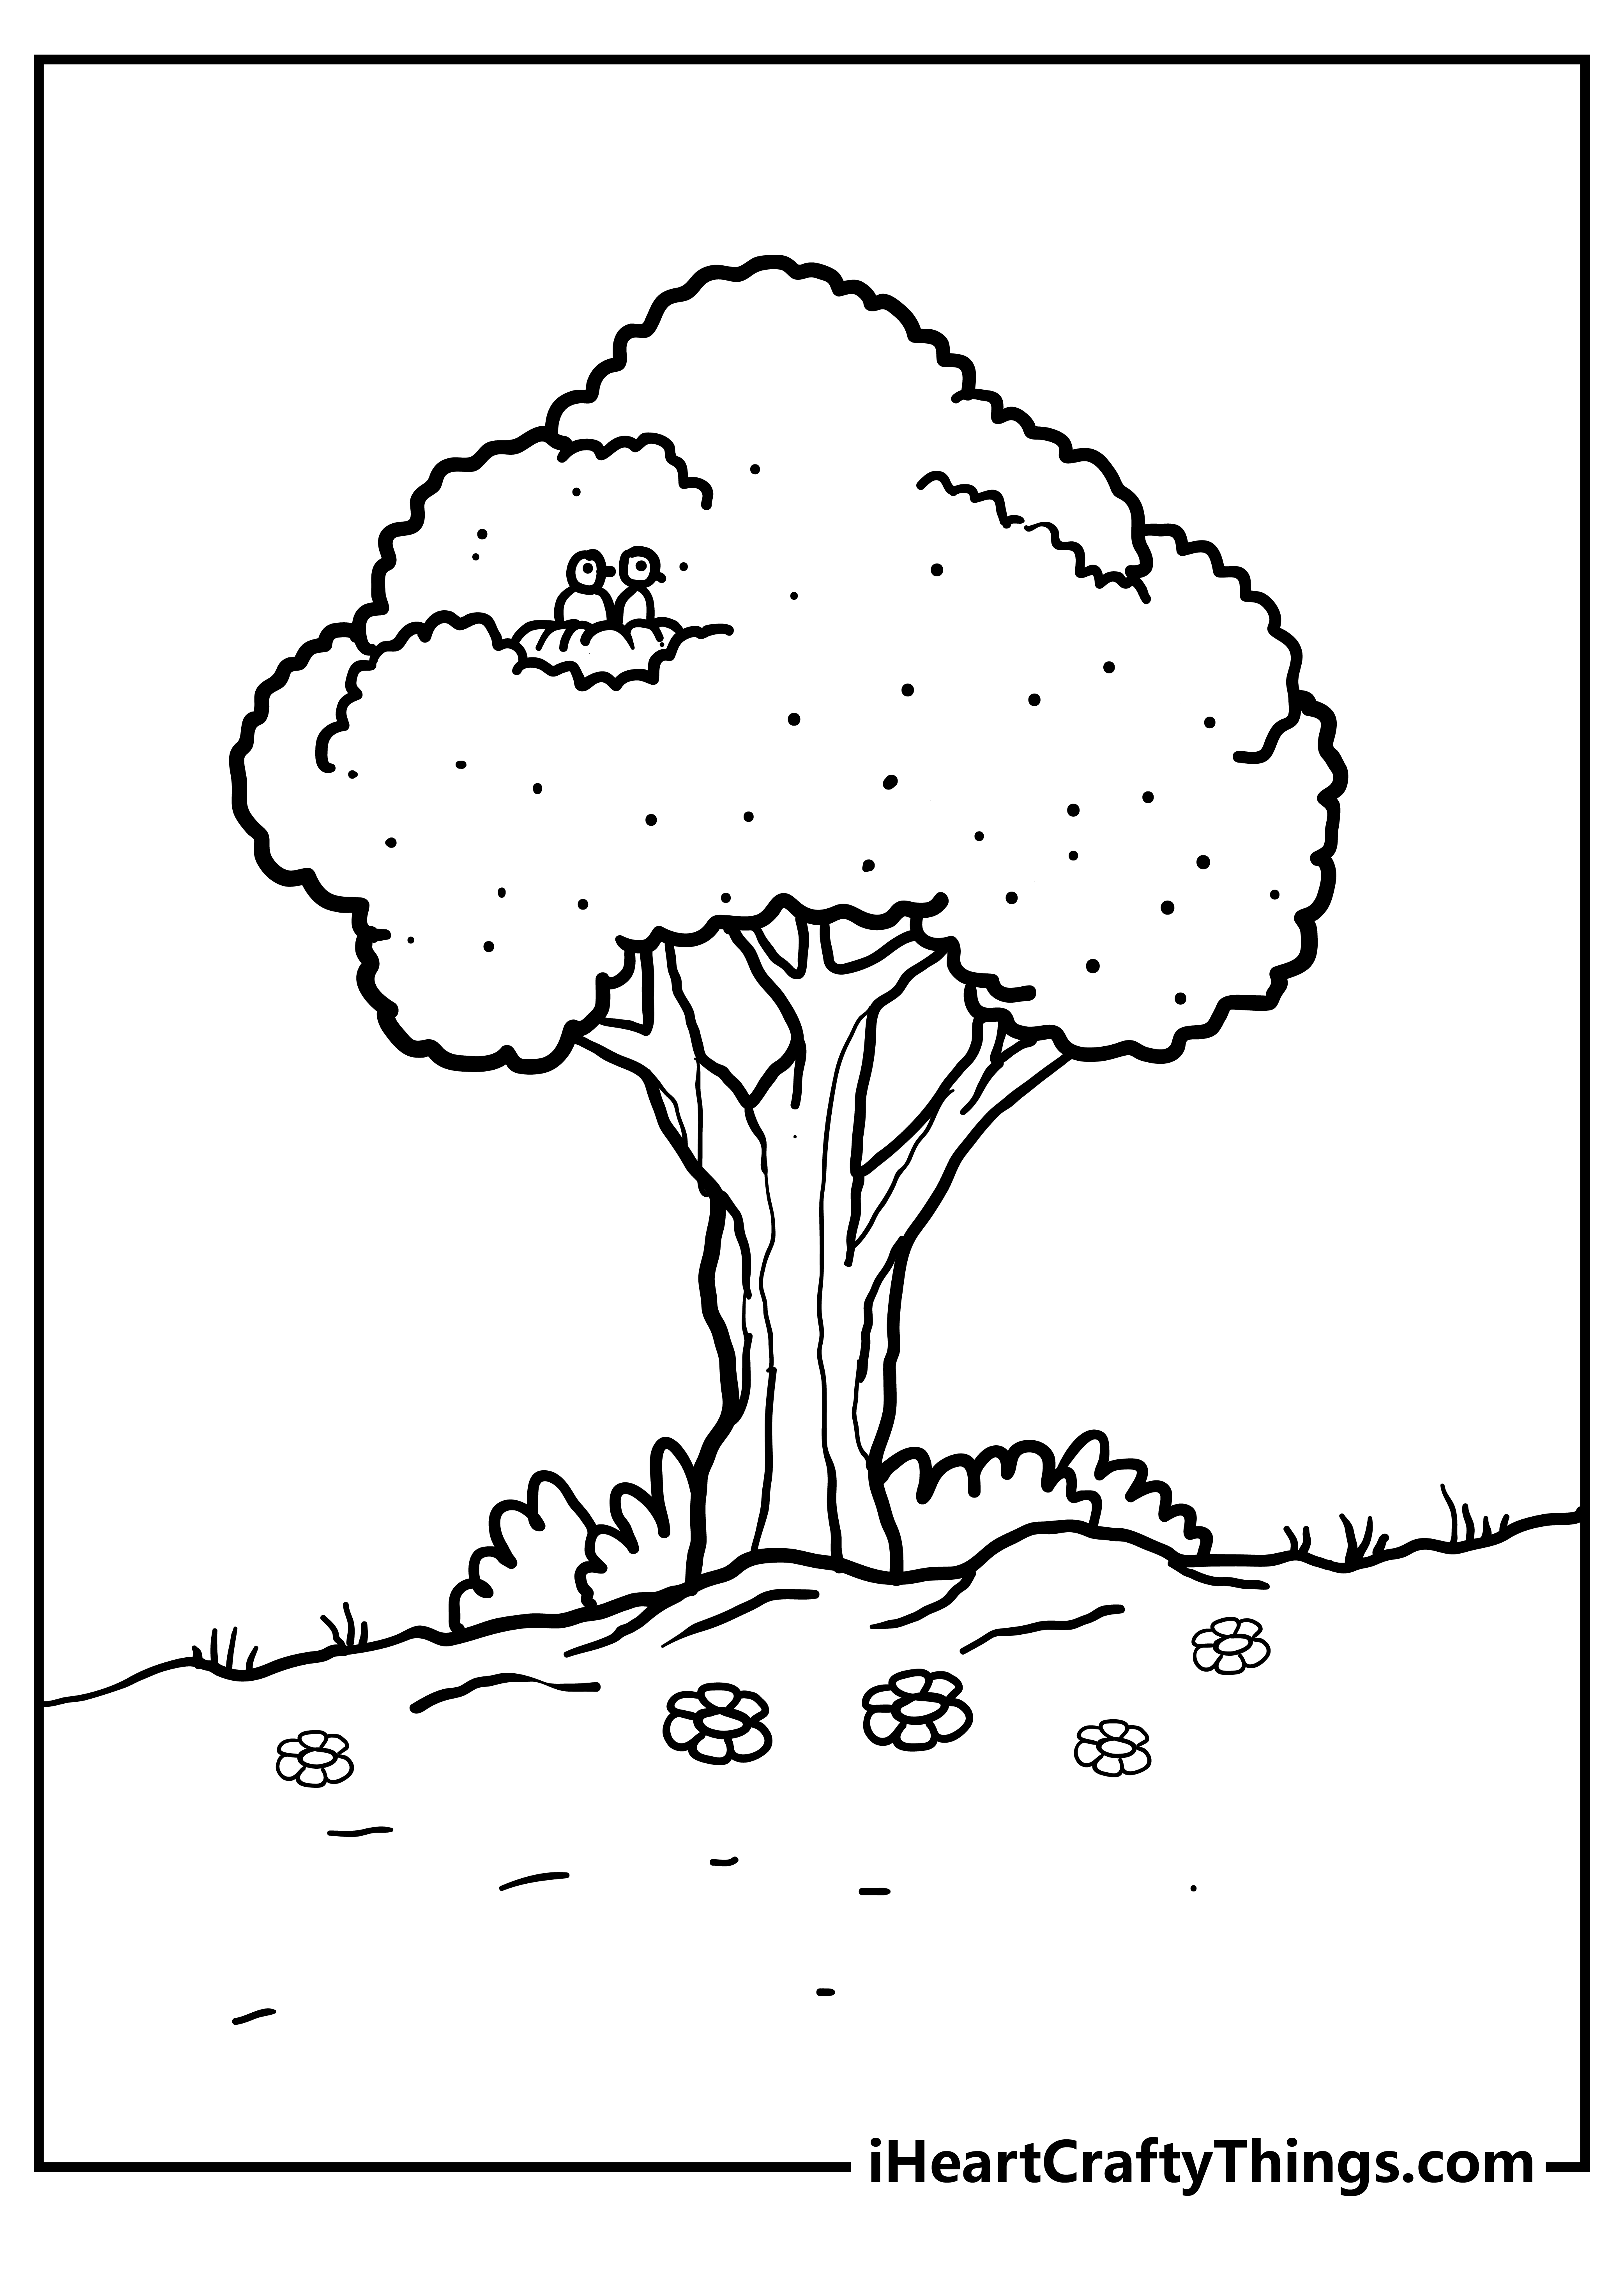 Nature Coloring Pages for kids free download